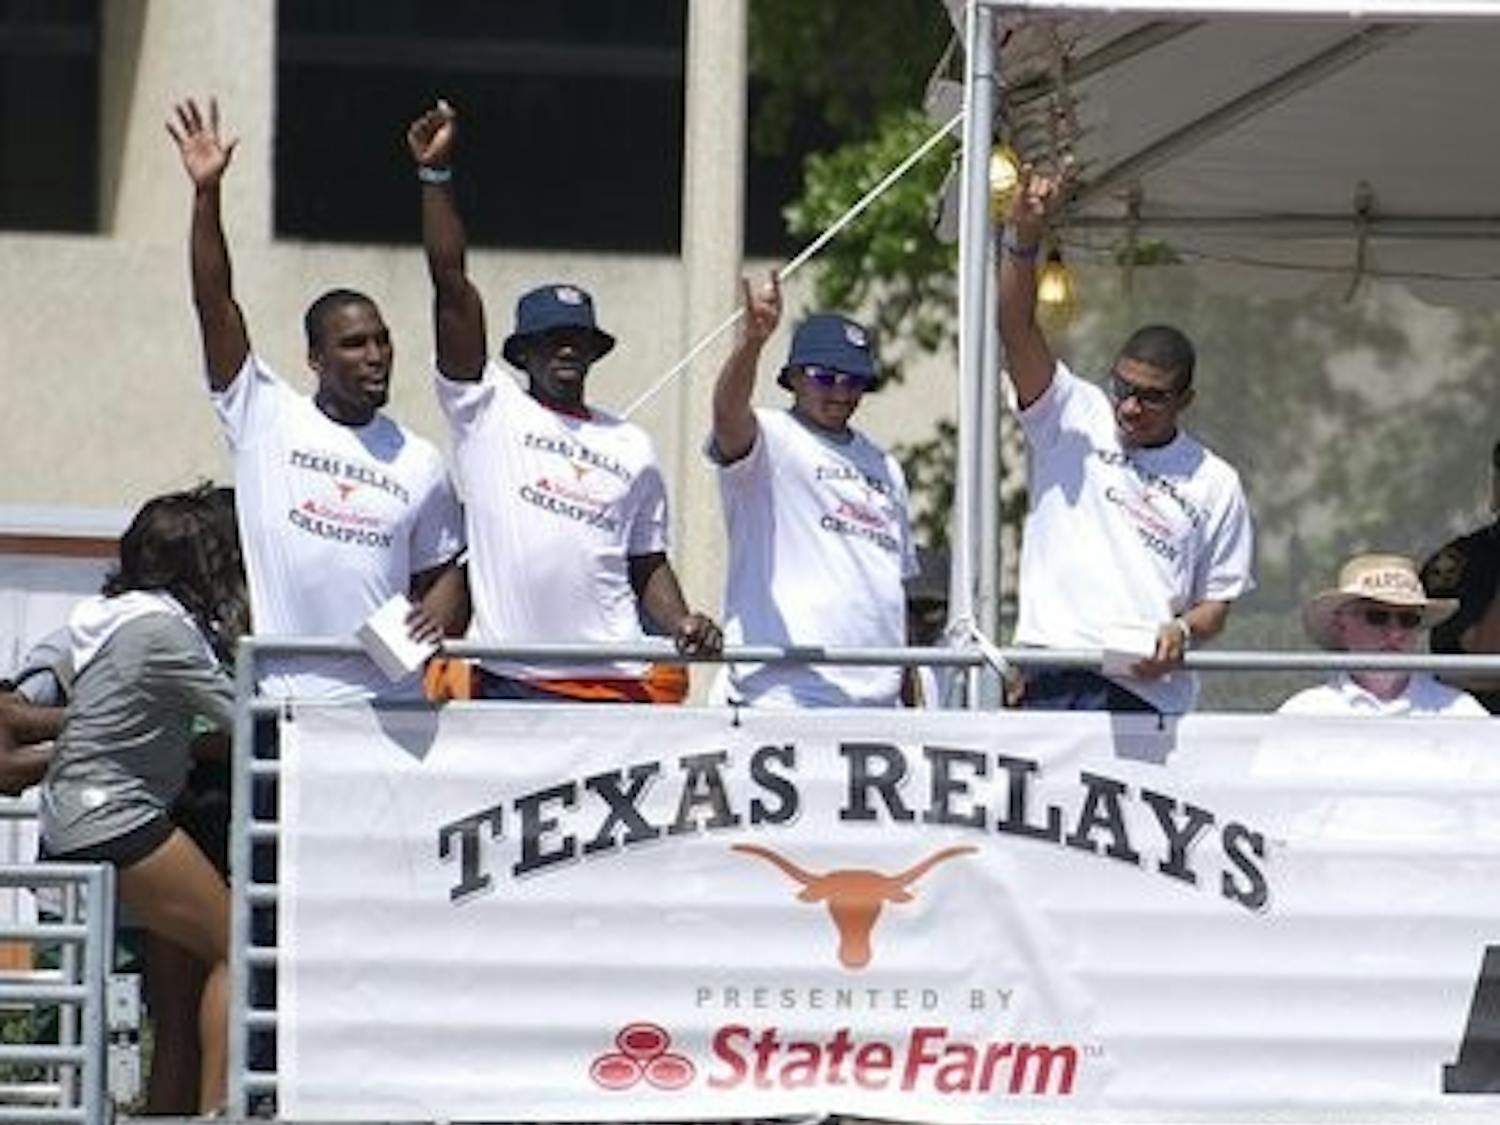 From left: Marcus Rowland, Harry Adams, Michael DeHaven and Keenan Brock of Auburn's 4x100 meter relay team celebrate their fastest world time of 2012 and Auburn record at the Texas Relays. The group was honored as SEC Co-Runners of the Week for their performance. (Courtesy of Media Relations)